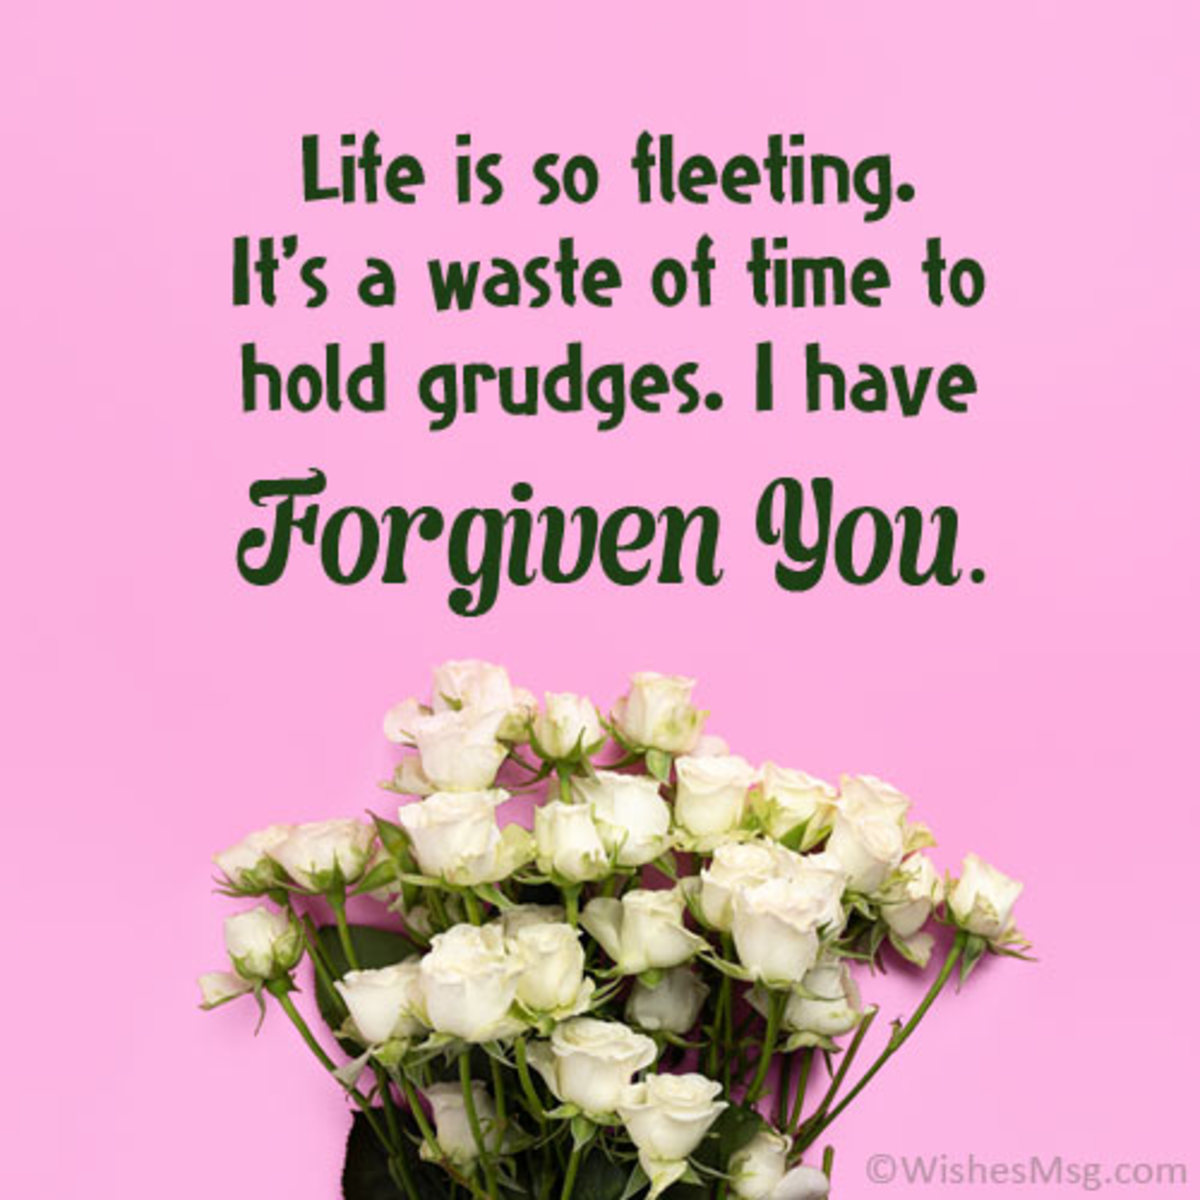 I Have Forgiven You With All My Heart And Soul!!